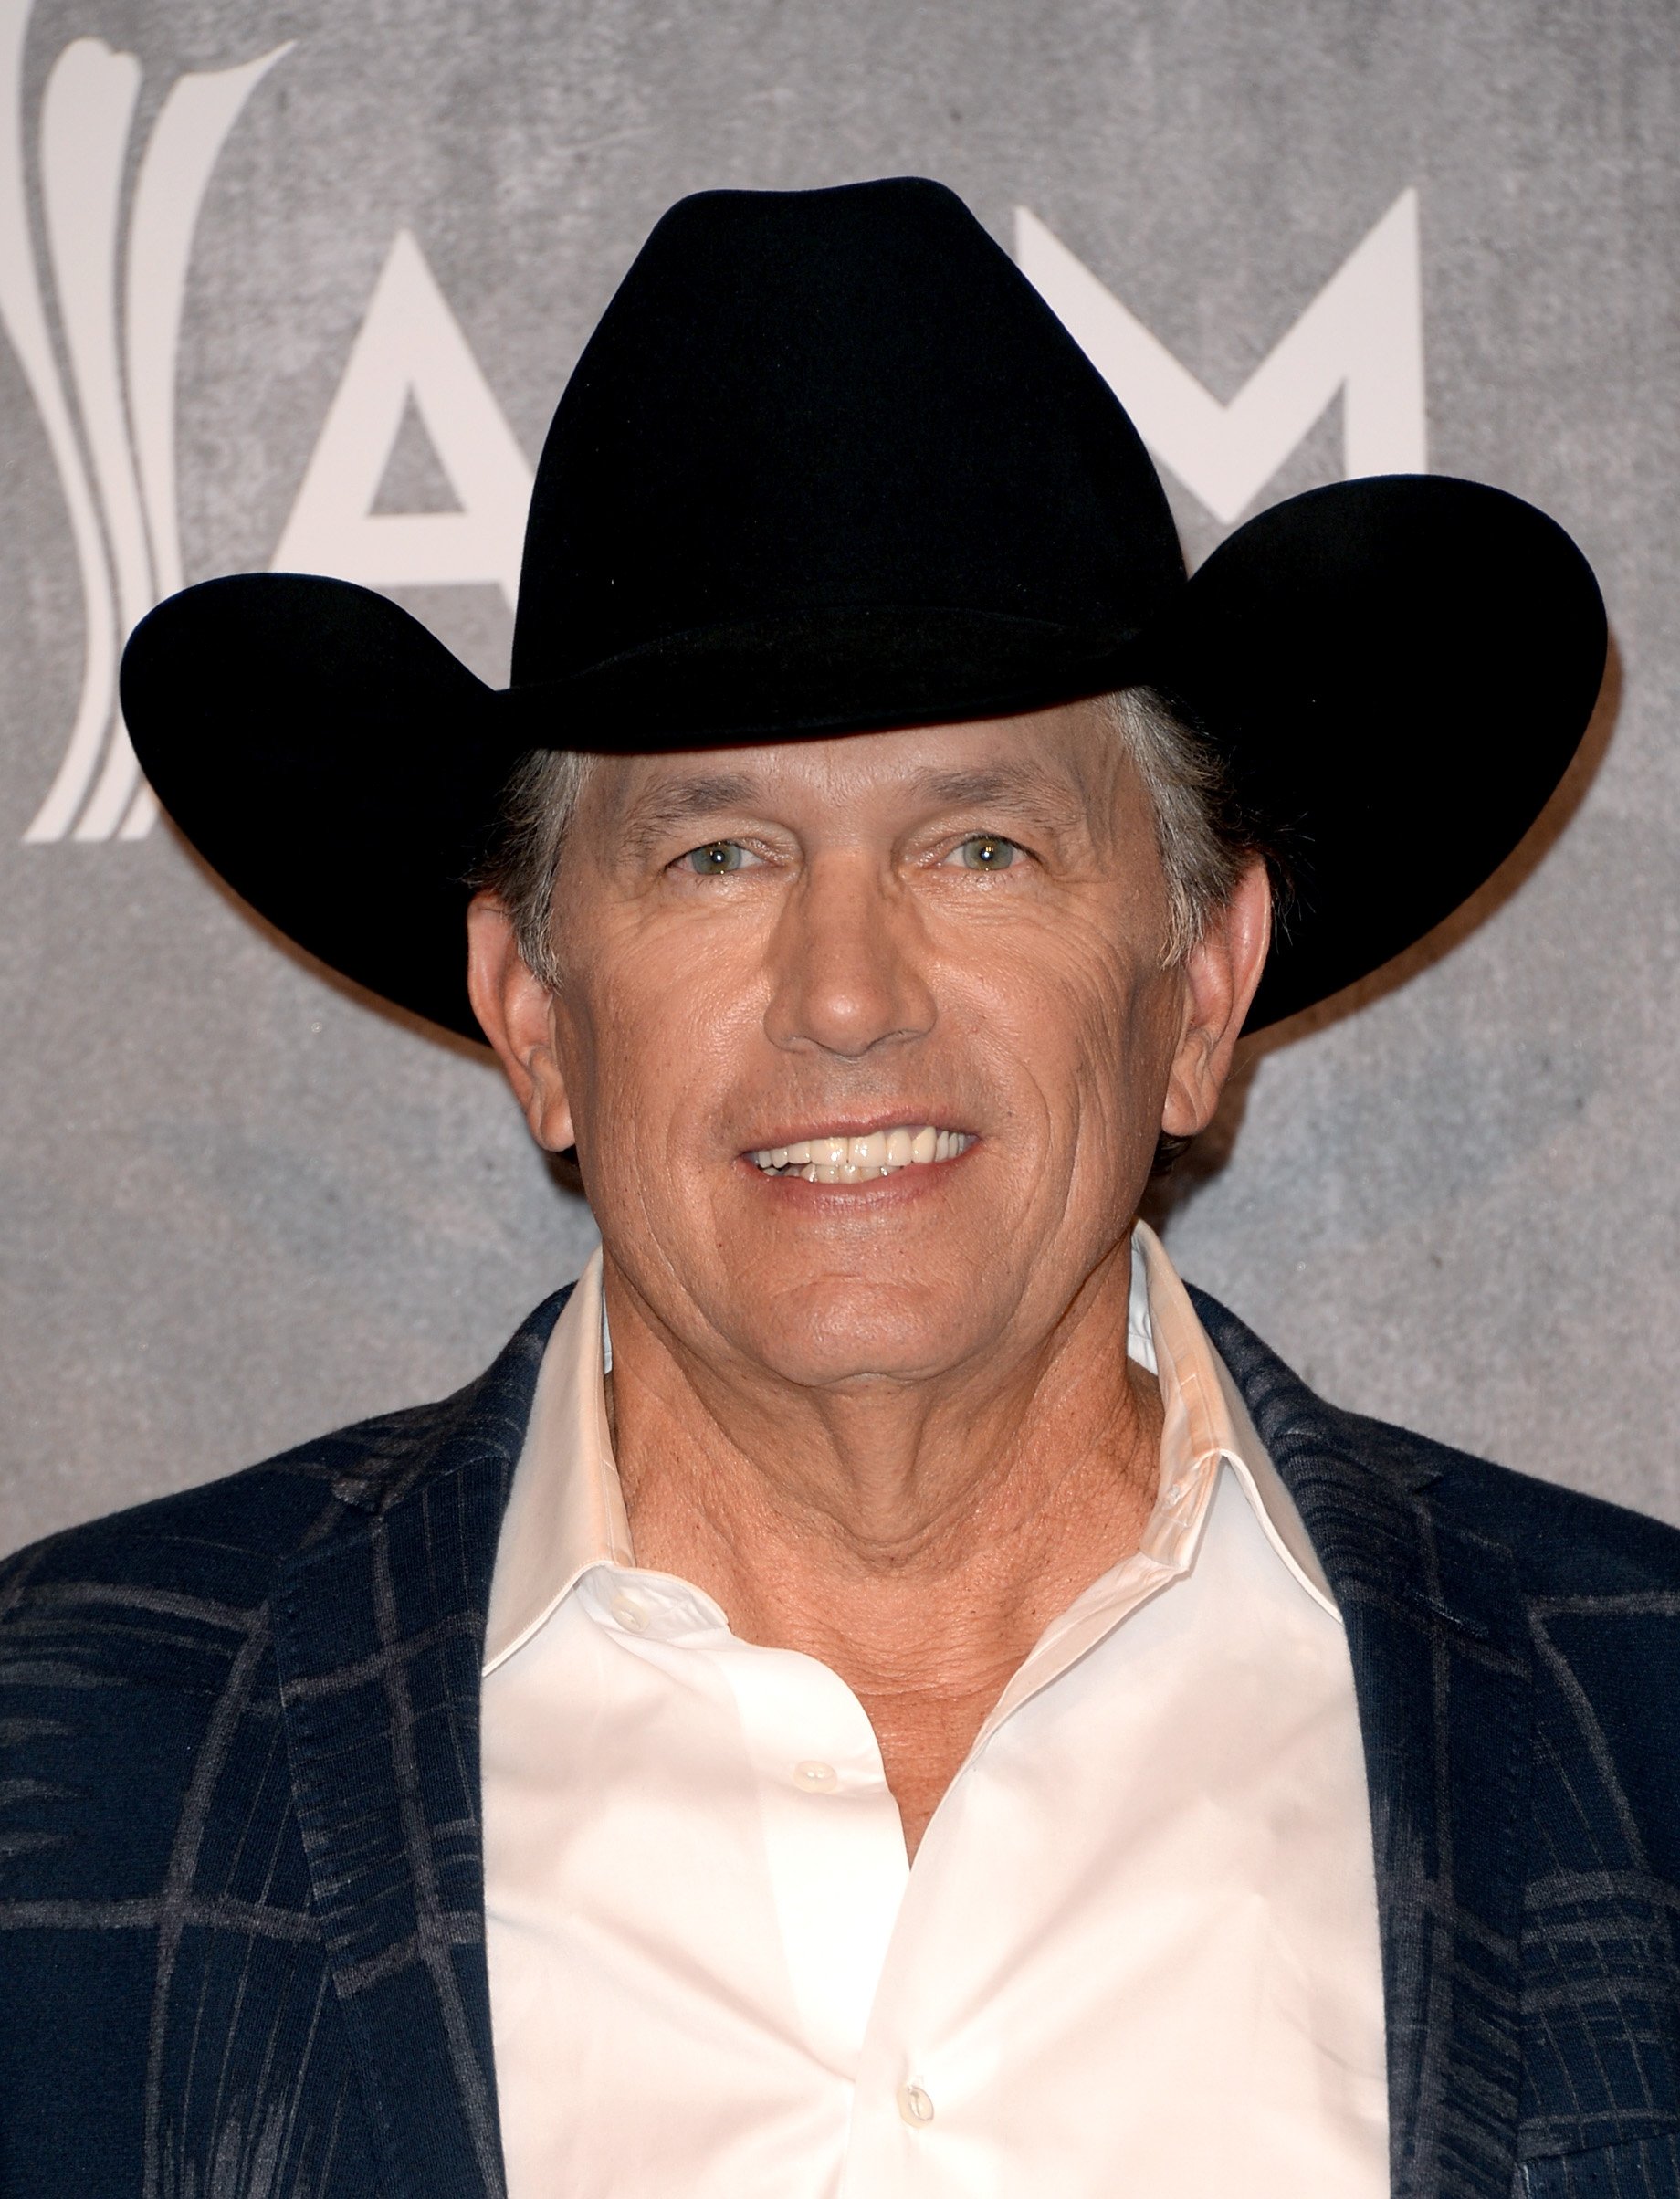 Country singer George Strait at the MGM Grand Garden Arena on April 6, 2014 in Las Vegas, Nevada. | Source: Getty Images